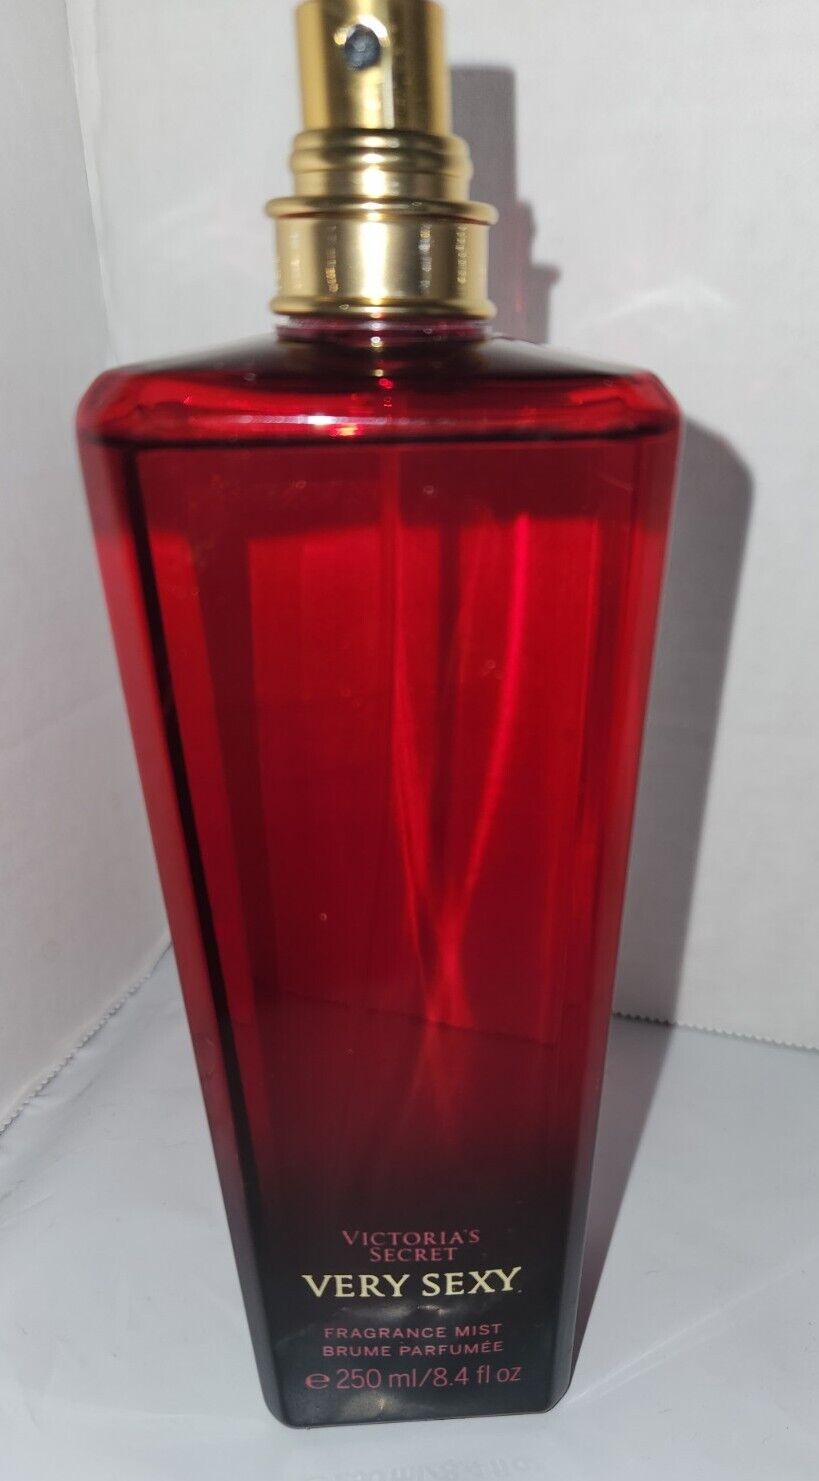 Victoria's Secret Very Sexy Limited Edition Fragrance Mist 8.4 oz. No Cap, Used